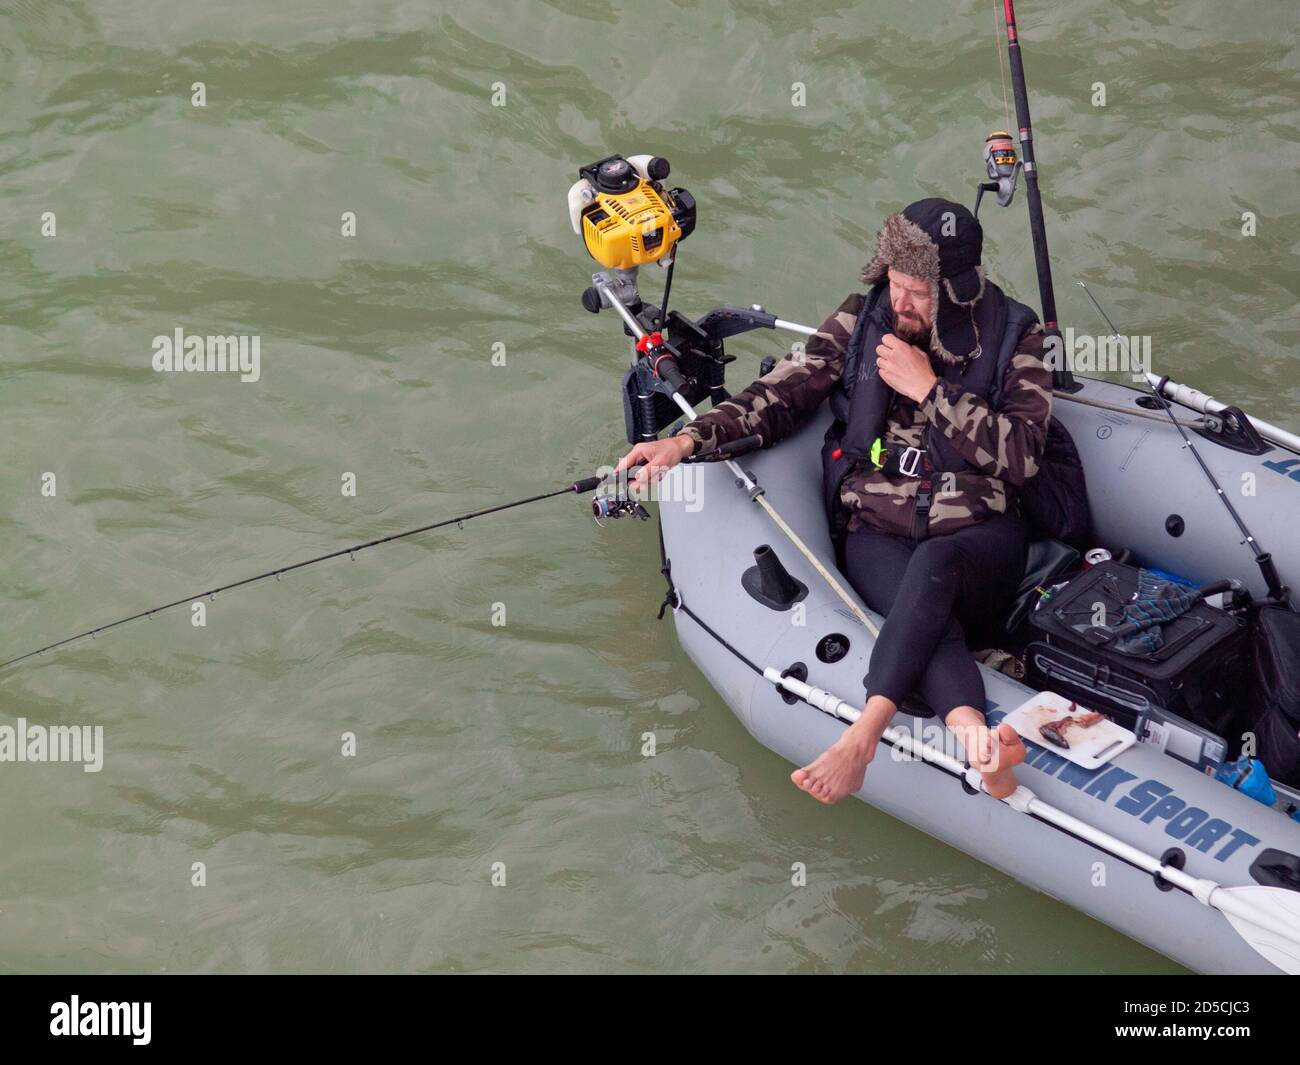 Man fishing from inflatable boat on river Stock Photo - Alamy